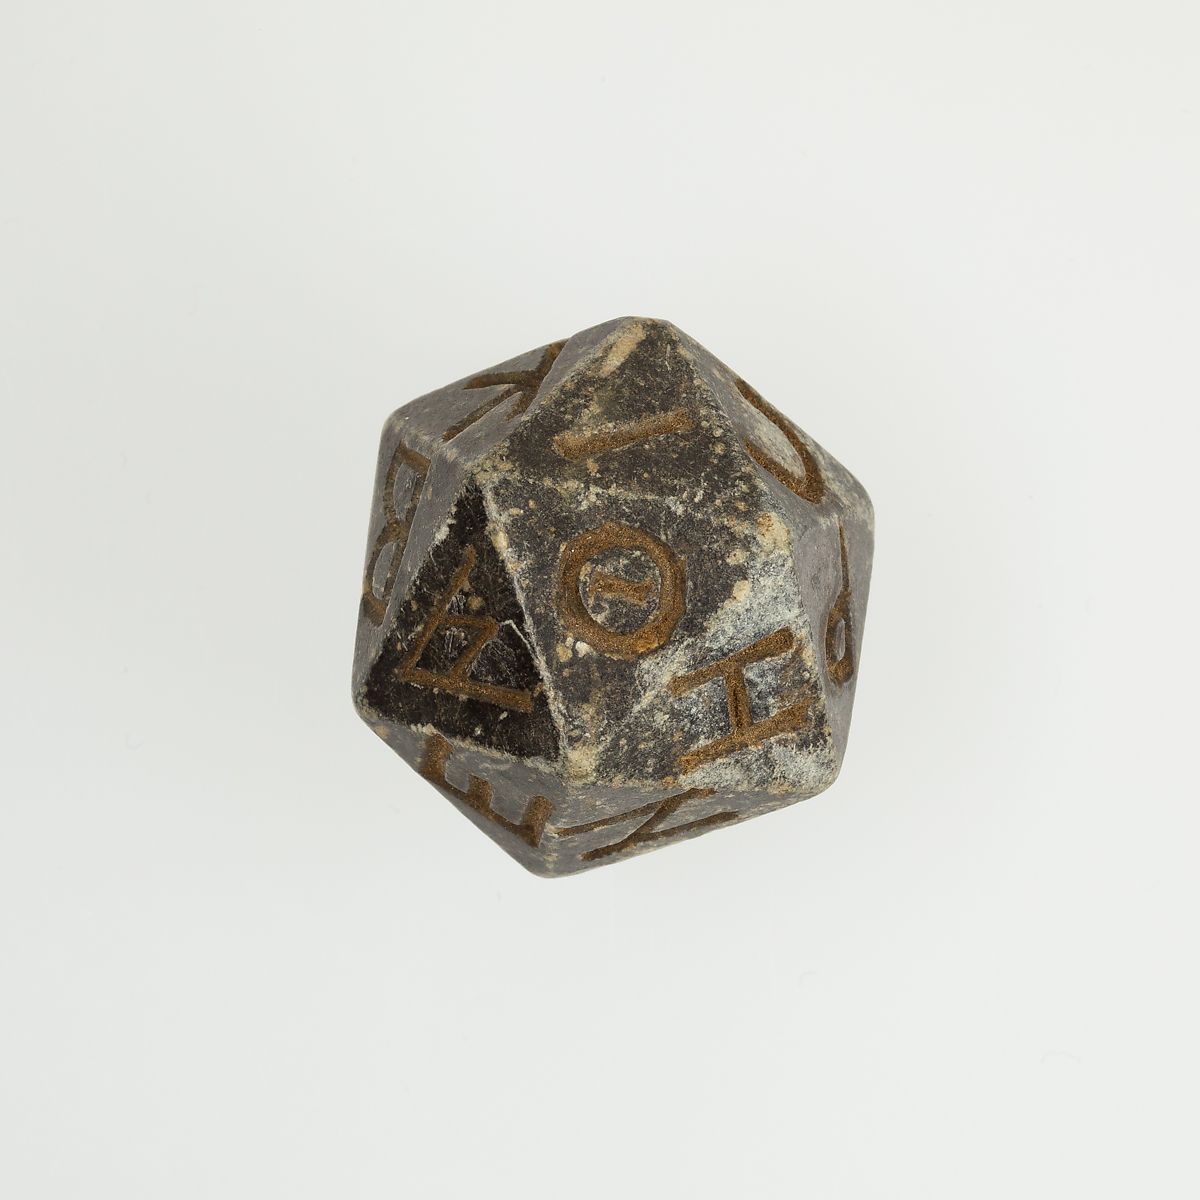 A Brief History of Polyhedral Dice